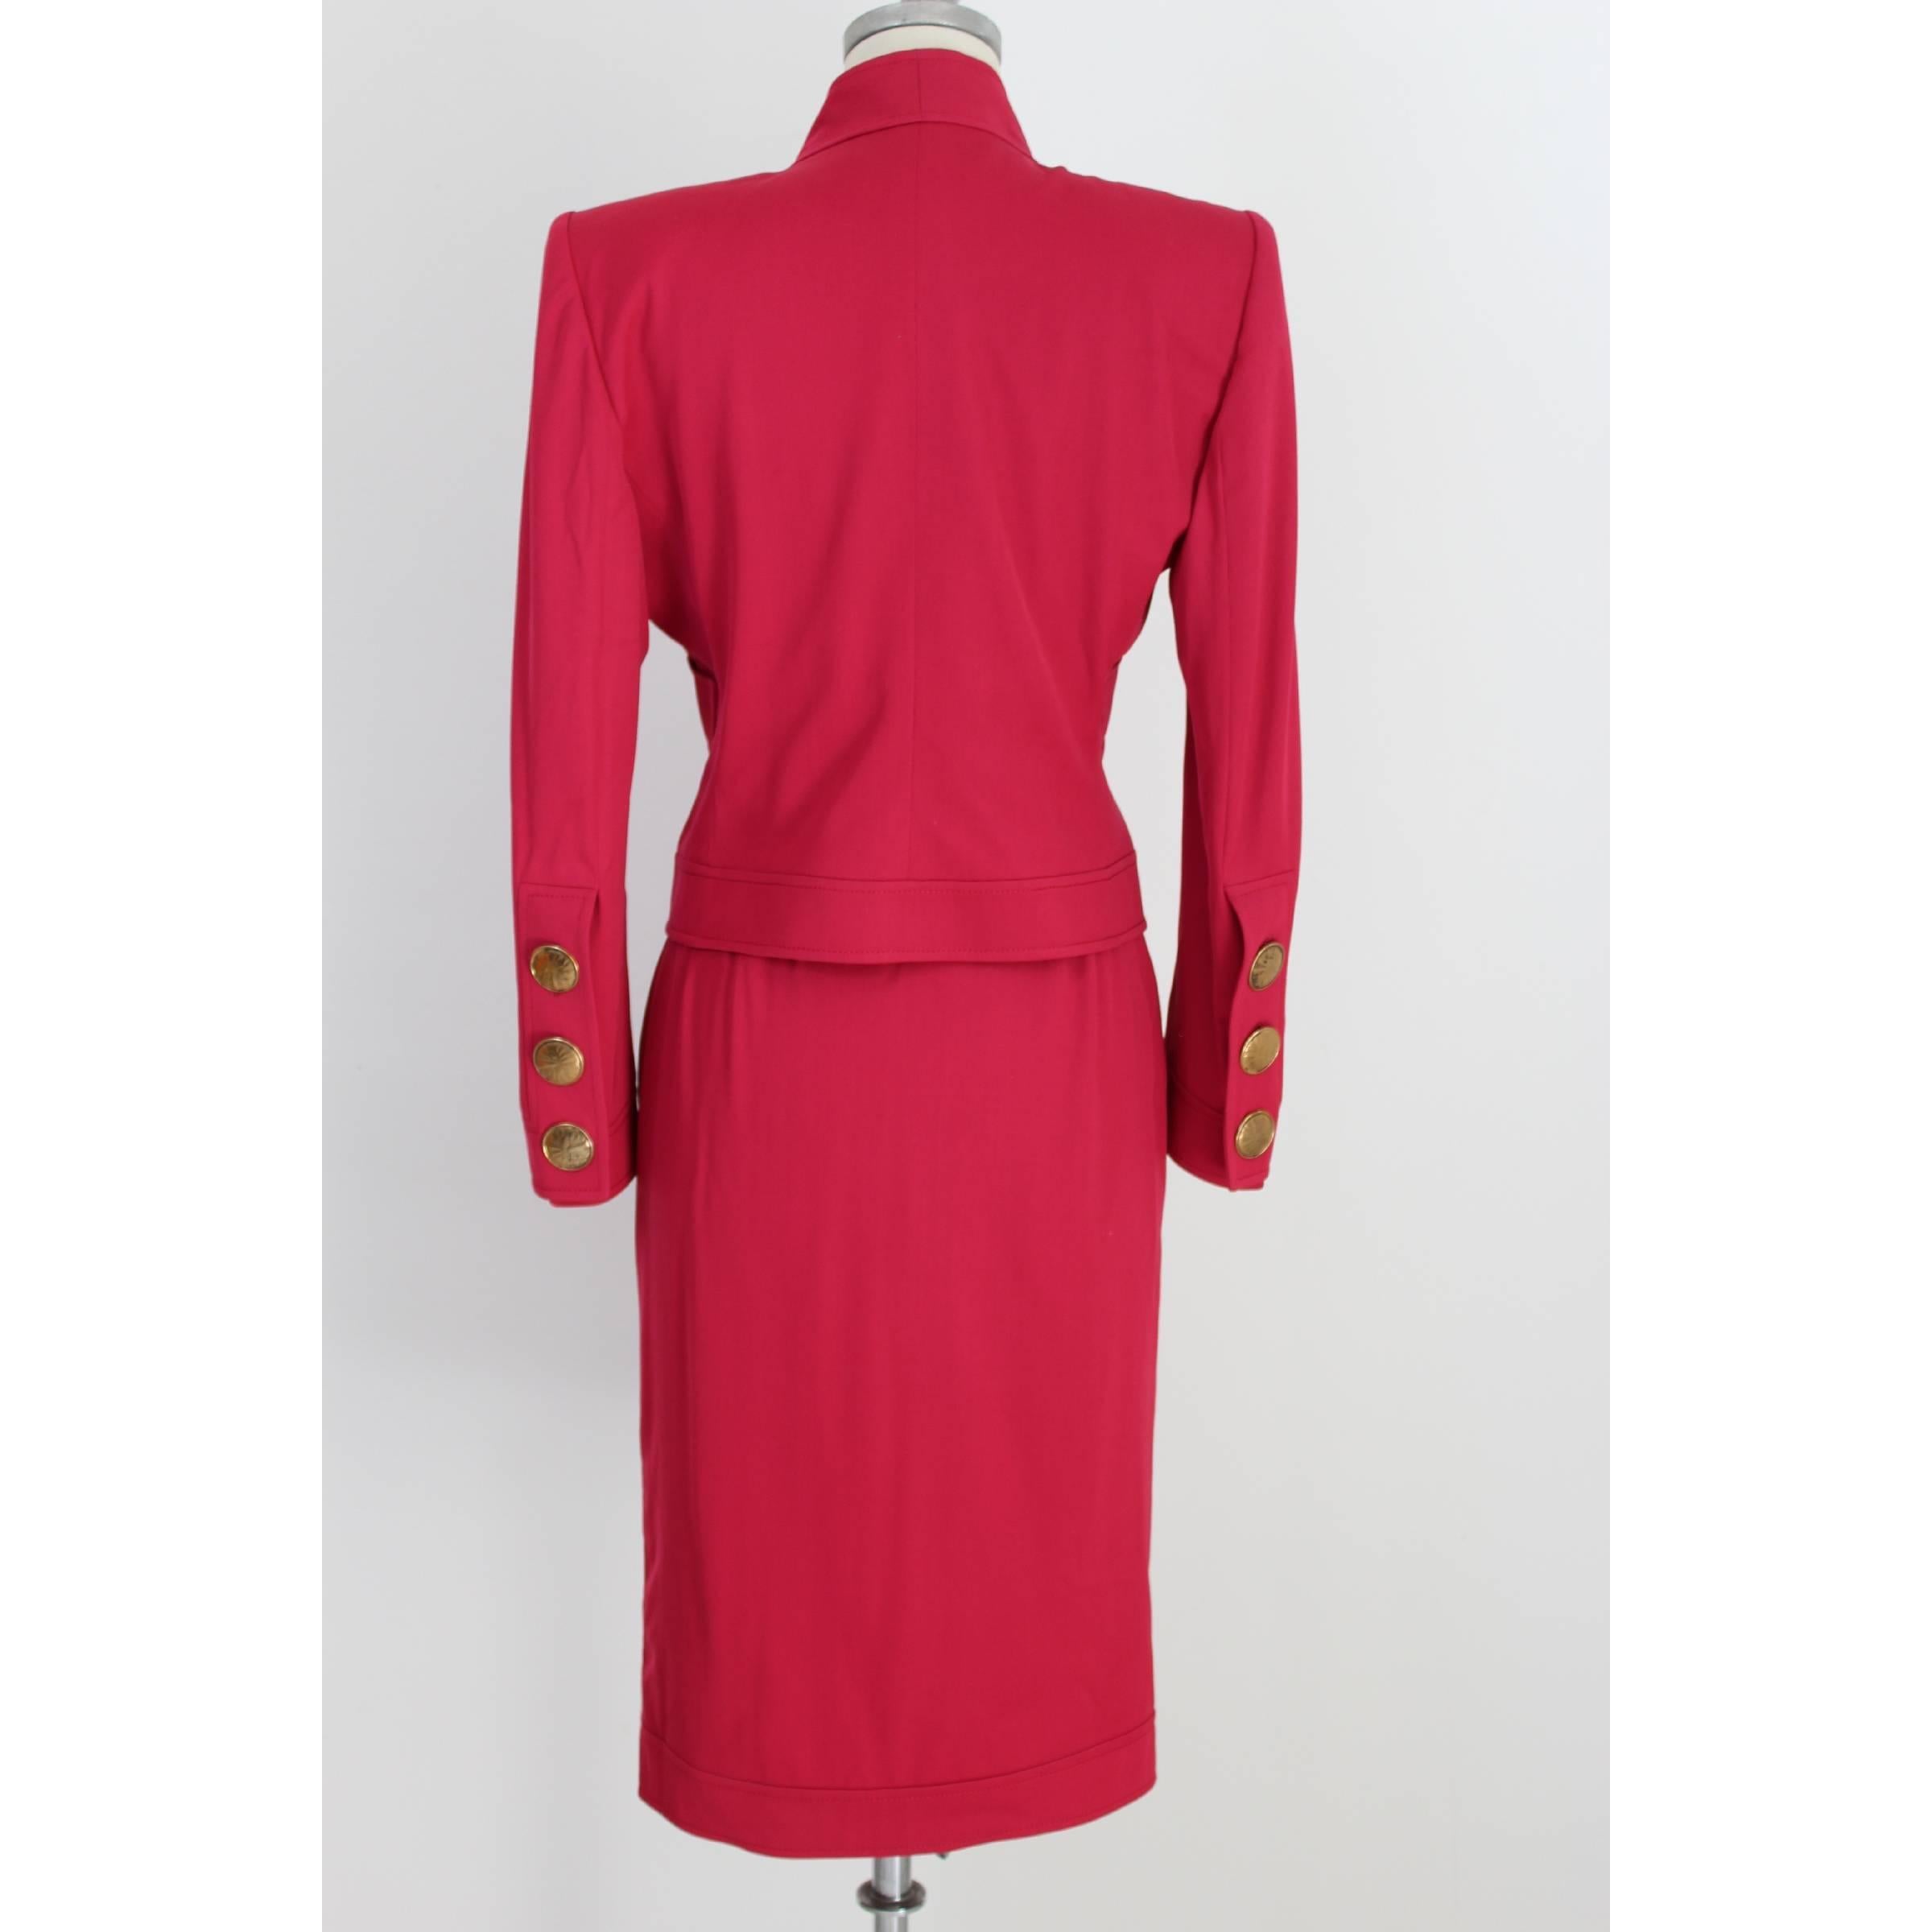 Mario Borsato women's skirt suit. Fuchsia color. The slim fit model jacket, with large gold-colored buttons, two side pockets. Sheath skirt model has a gold-colored button on the edge. Made in Italy. New with tag.

Size: 44 IT 10 US 12 UK

Shoulder: